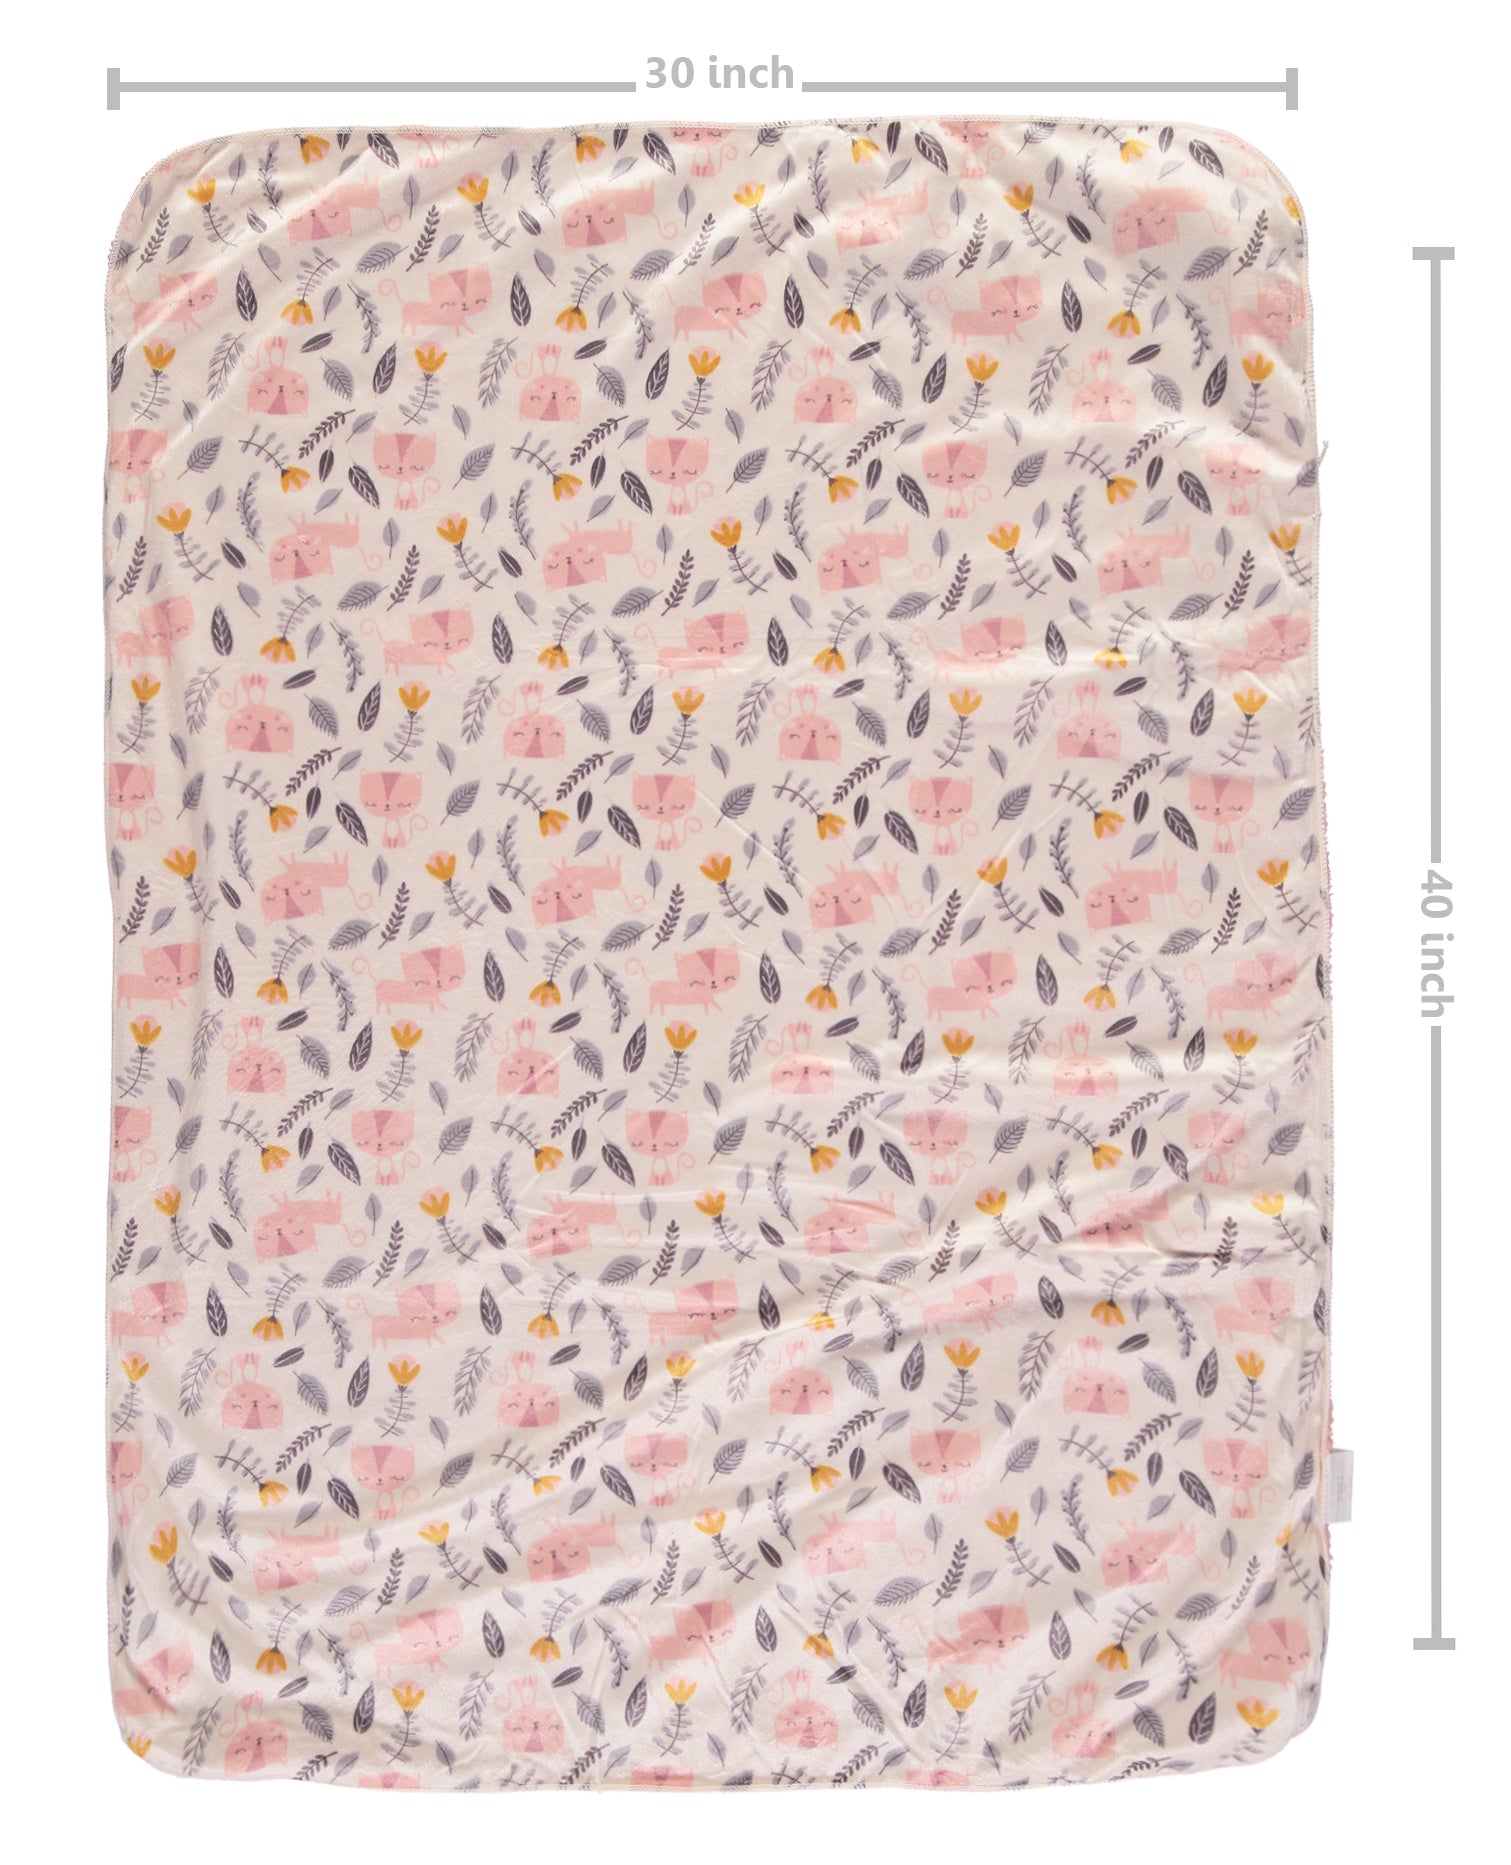 Baby by Bon Bébé Baby Girls' and Baby Boys' Soft and Cuddly Plush Baby Blanket